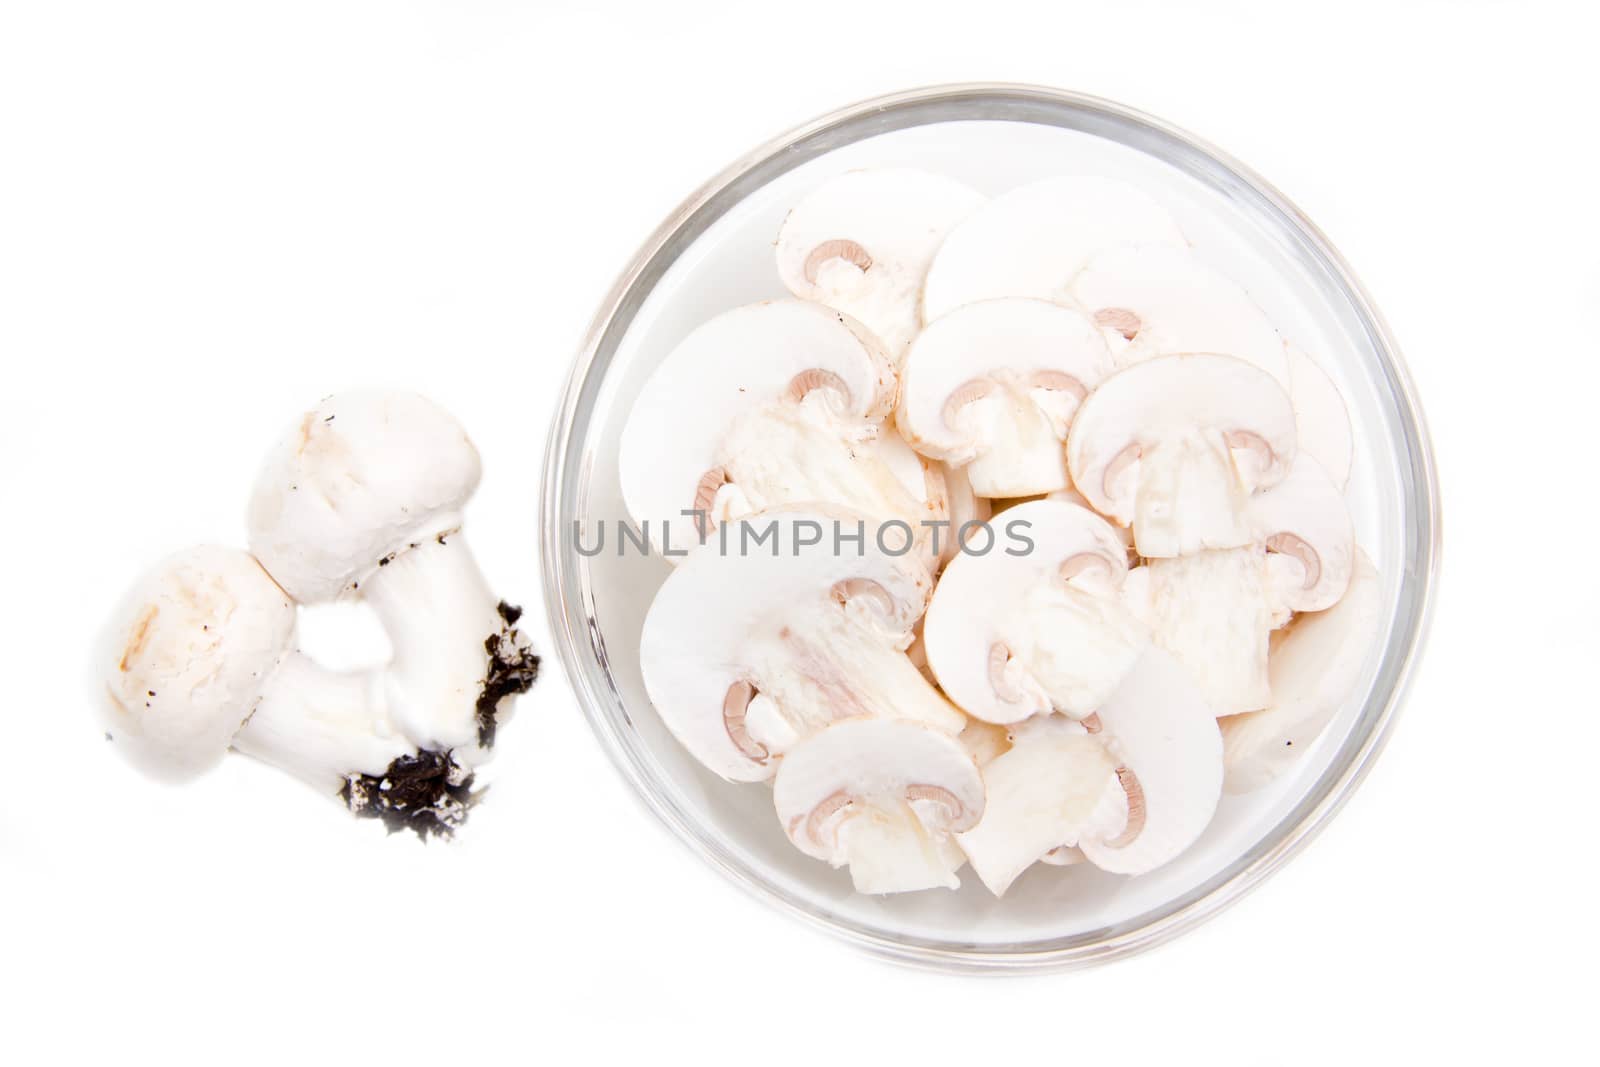 Sliced mushrooms in bowl on white background seen from above